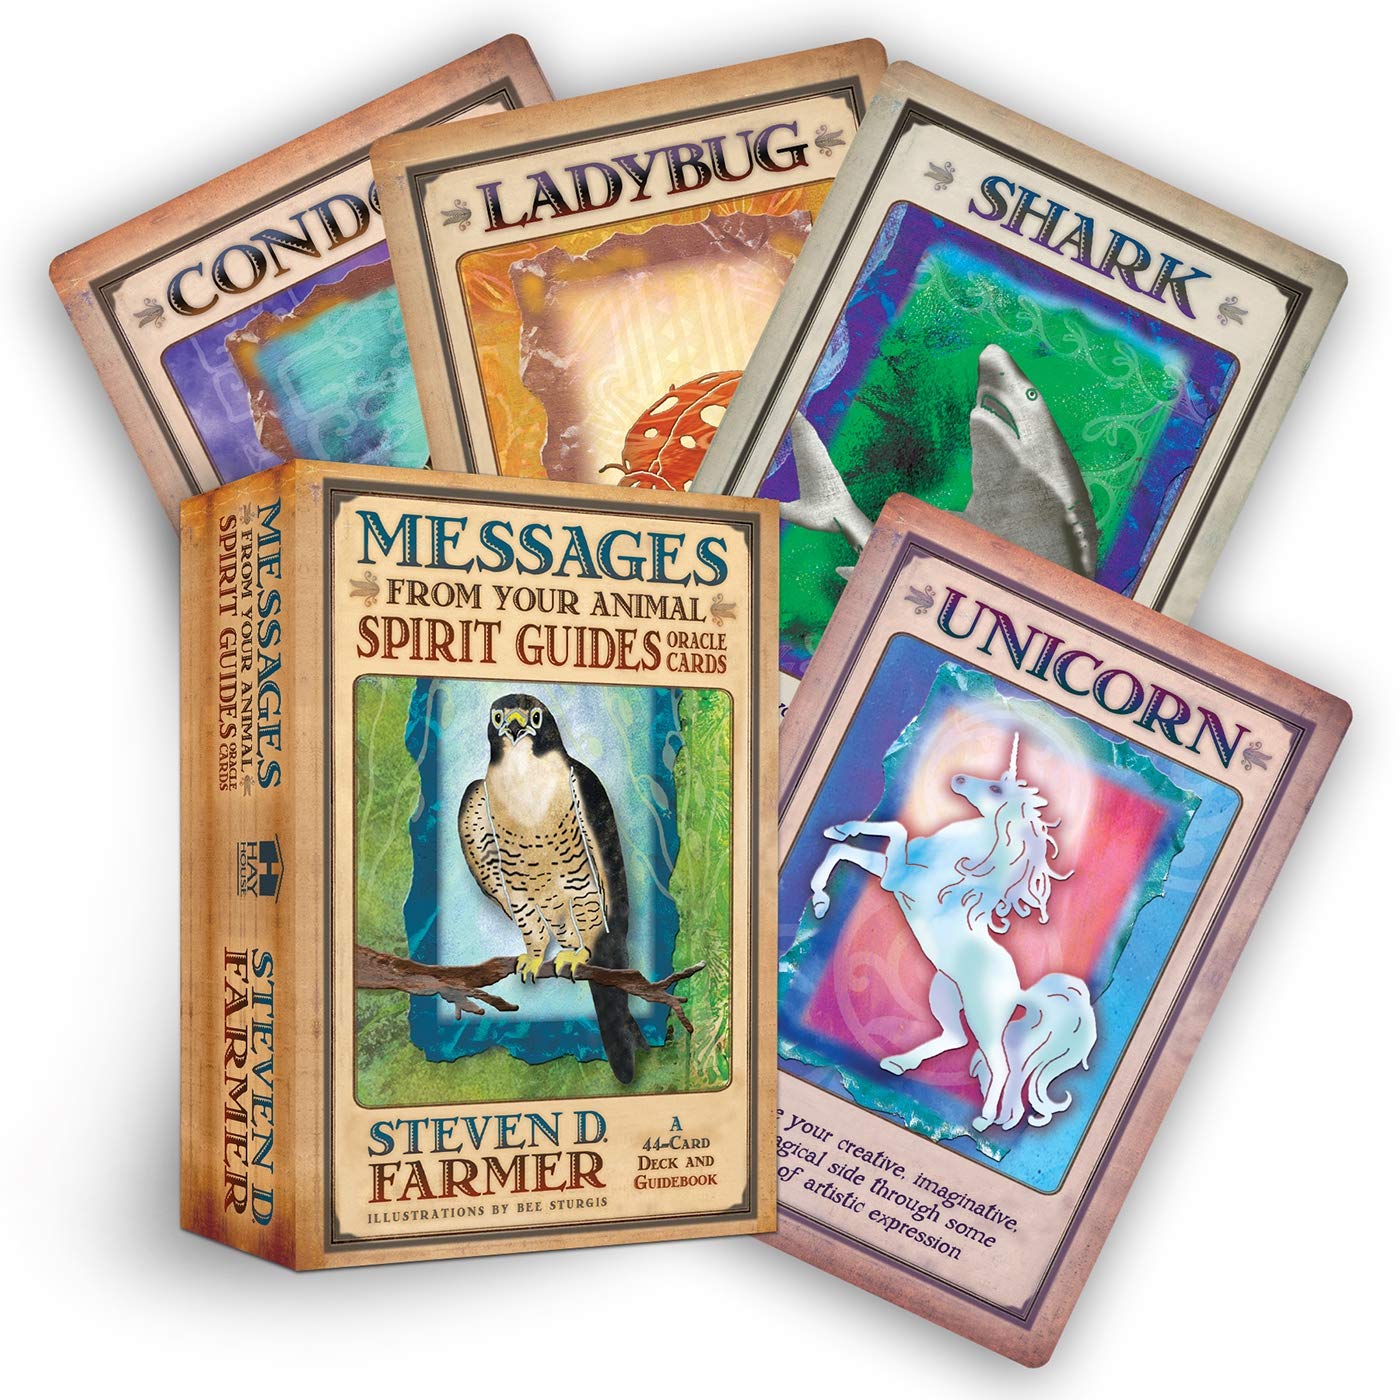 Messages From Your Animal Spirit Guides Oracle Cards by Steven Farmer